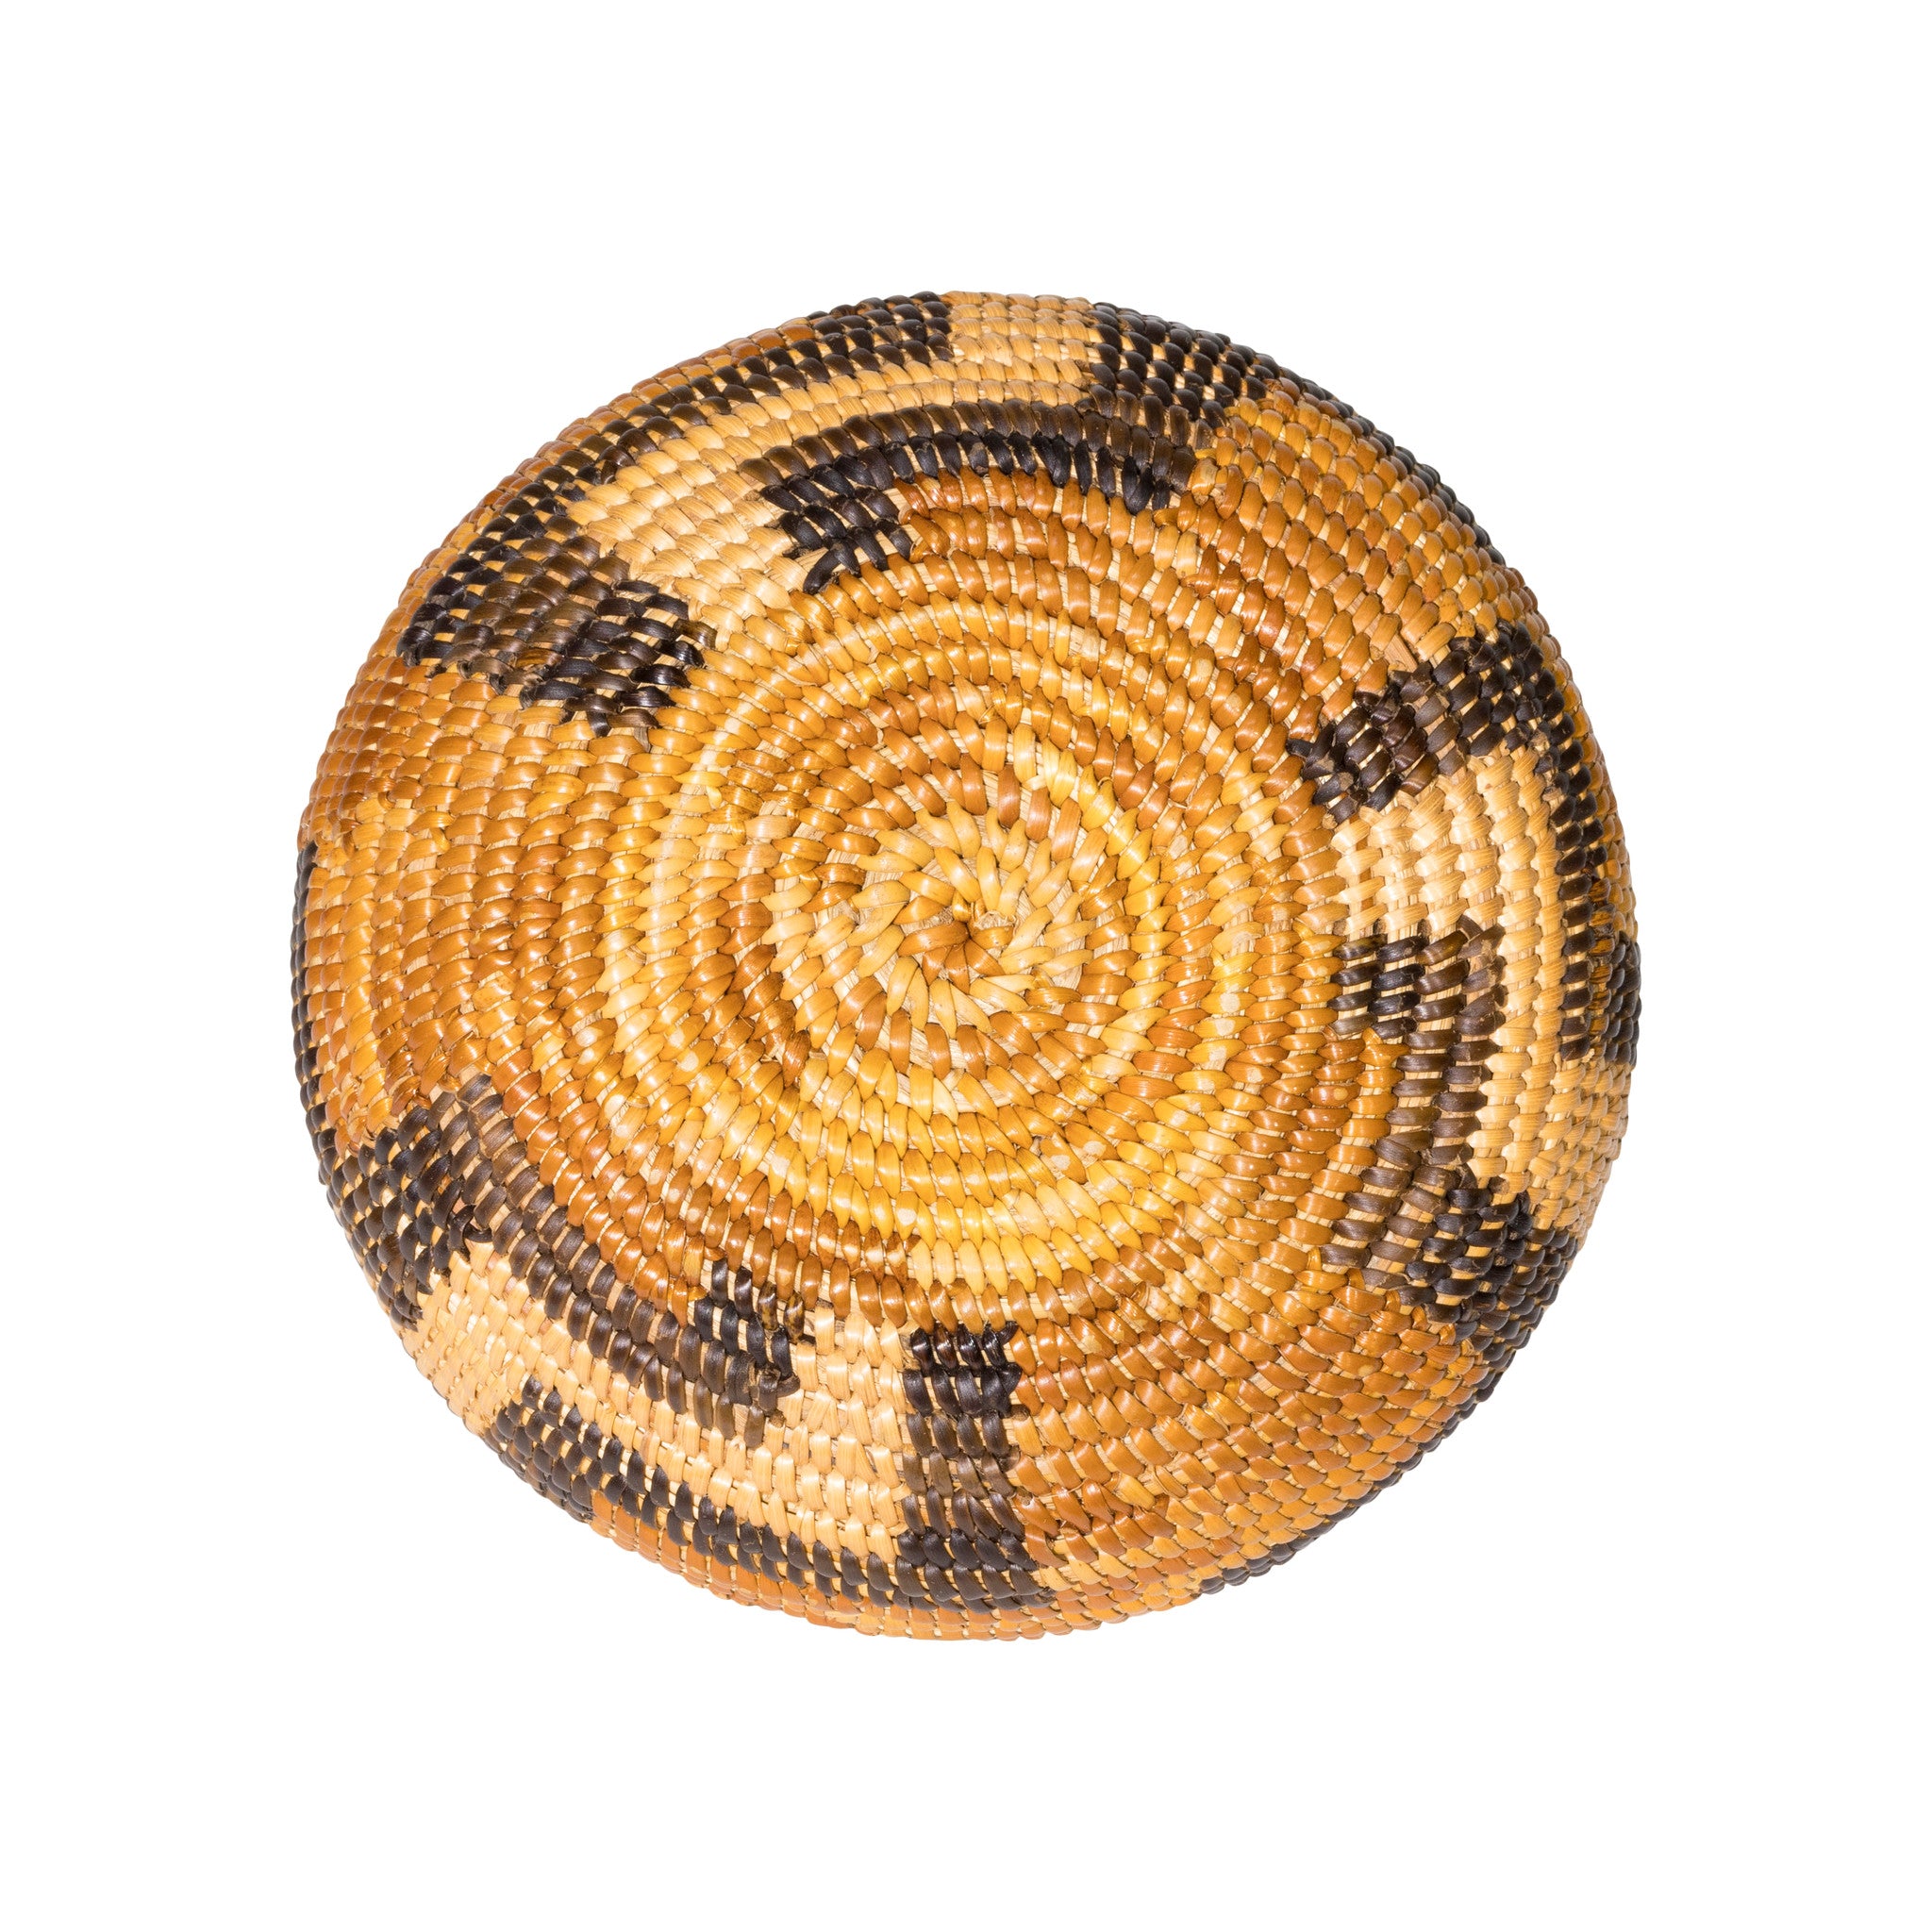 Diegueno Mission Basketry Bowl